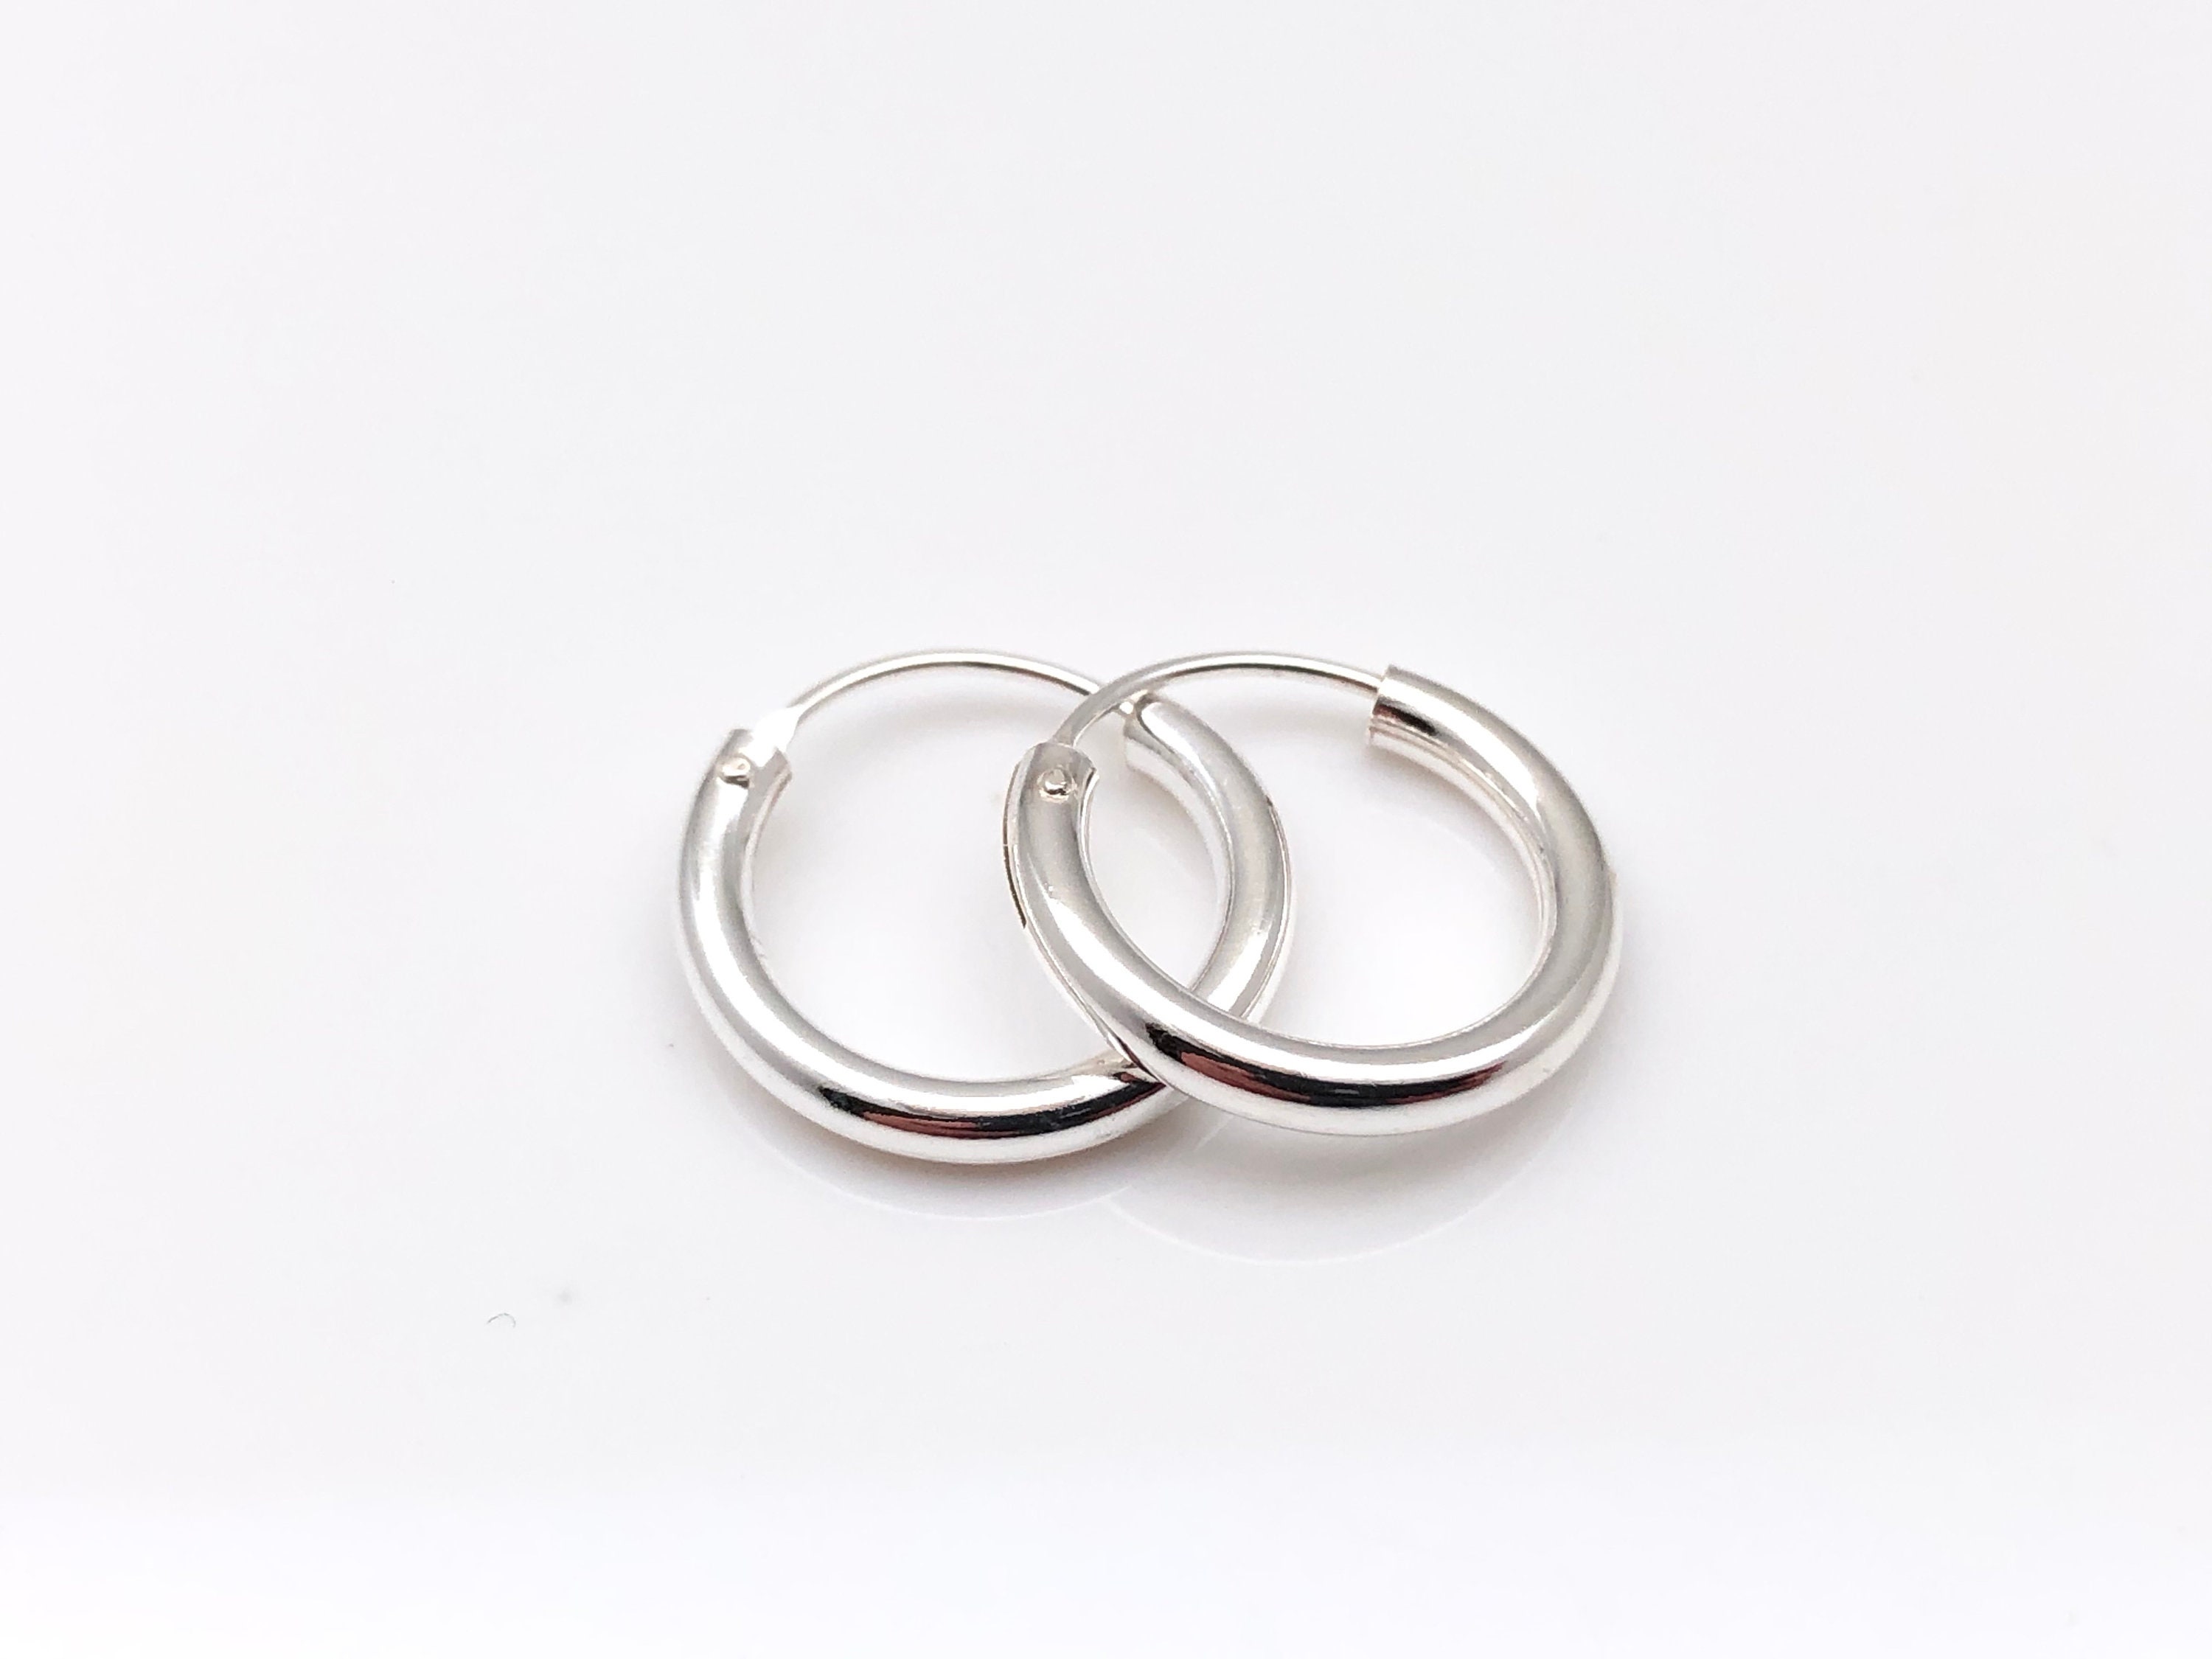 Small 12mm Endless Hoop Earrings 12mm X 2mm Small Silver - Etsy